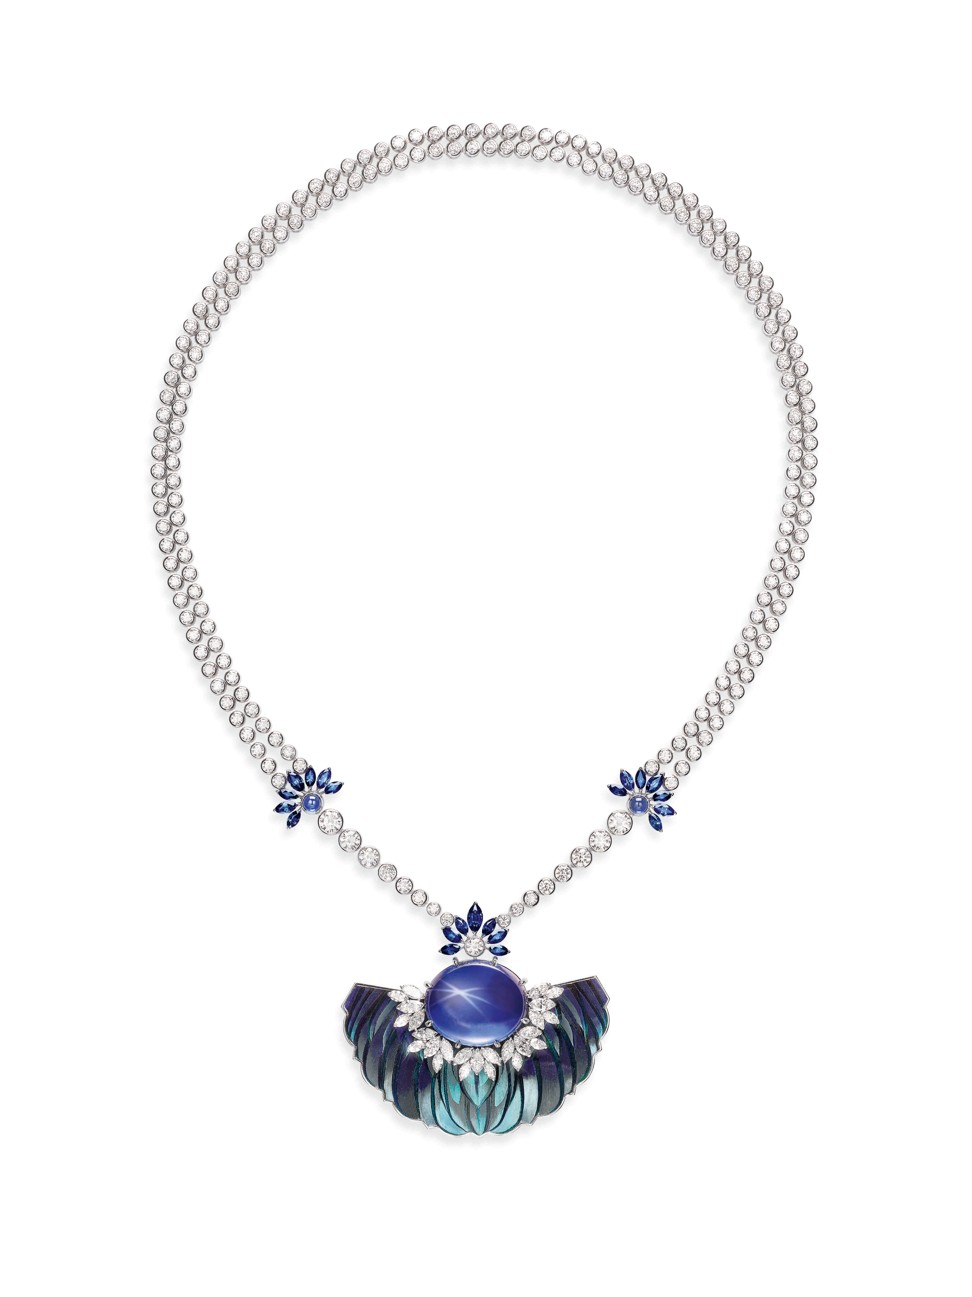 PIAGET LAUNCHES HIGH JEWELLERY SOLSTICE PART 3 'TONIGHT'S OUR